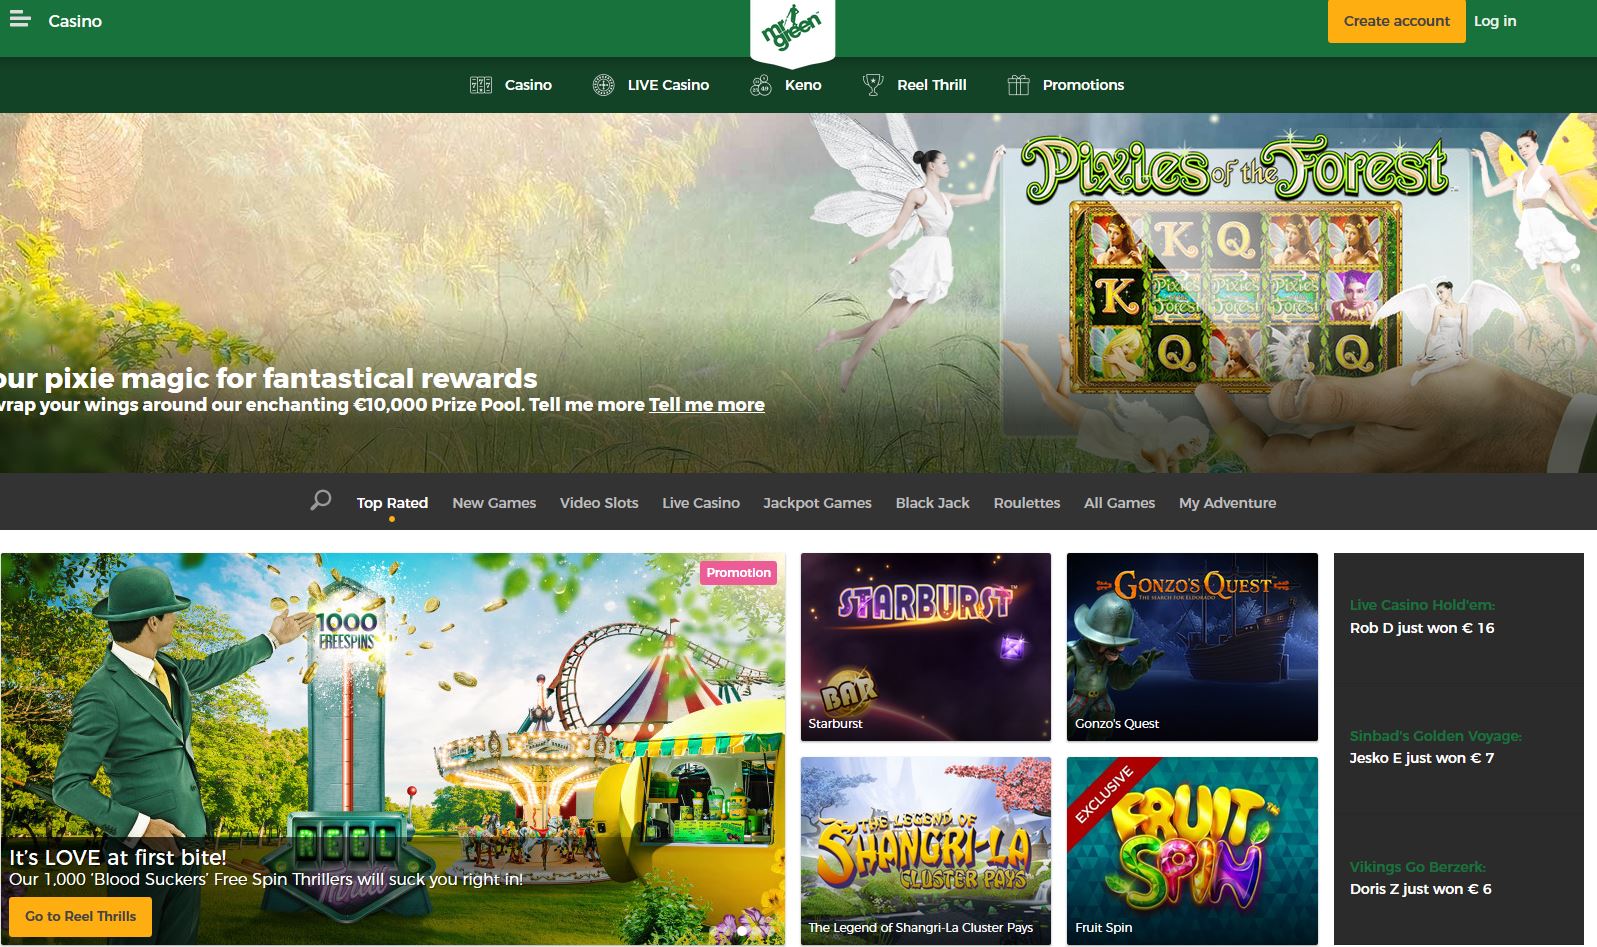 USA Online Casinos and Canadian Casinos - Play Free Online Casino Slots